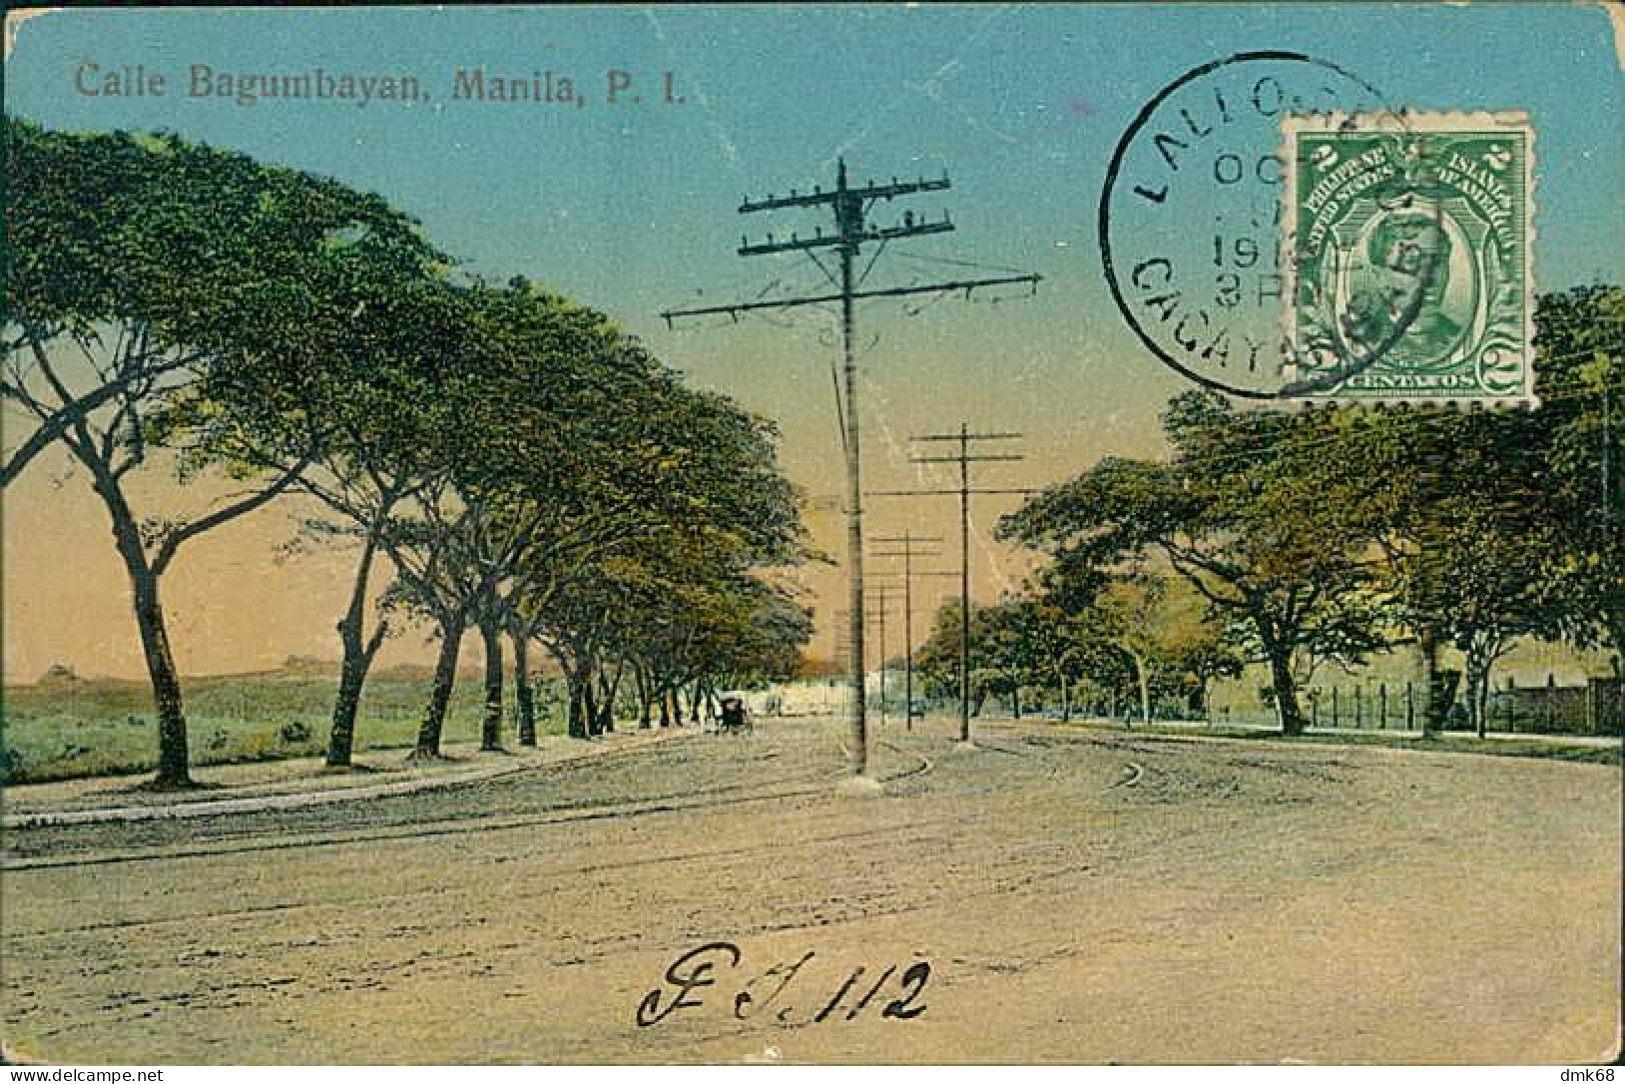 PHILIPPINES - MANILA - CALLE BAGUMBAYAN - PUB. BY CAMERA SUPPLY COMPANY - MAILED 1918 / STAMP (18345) - Philippinen